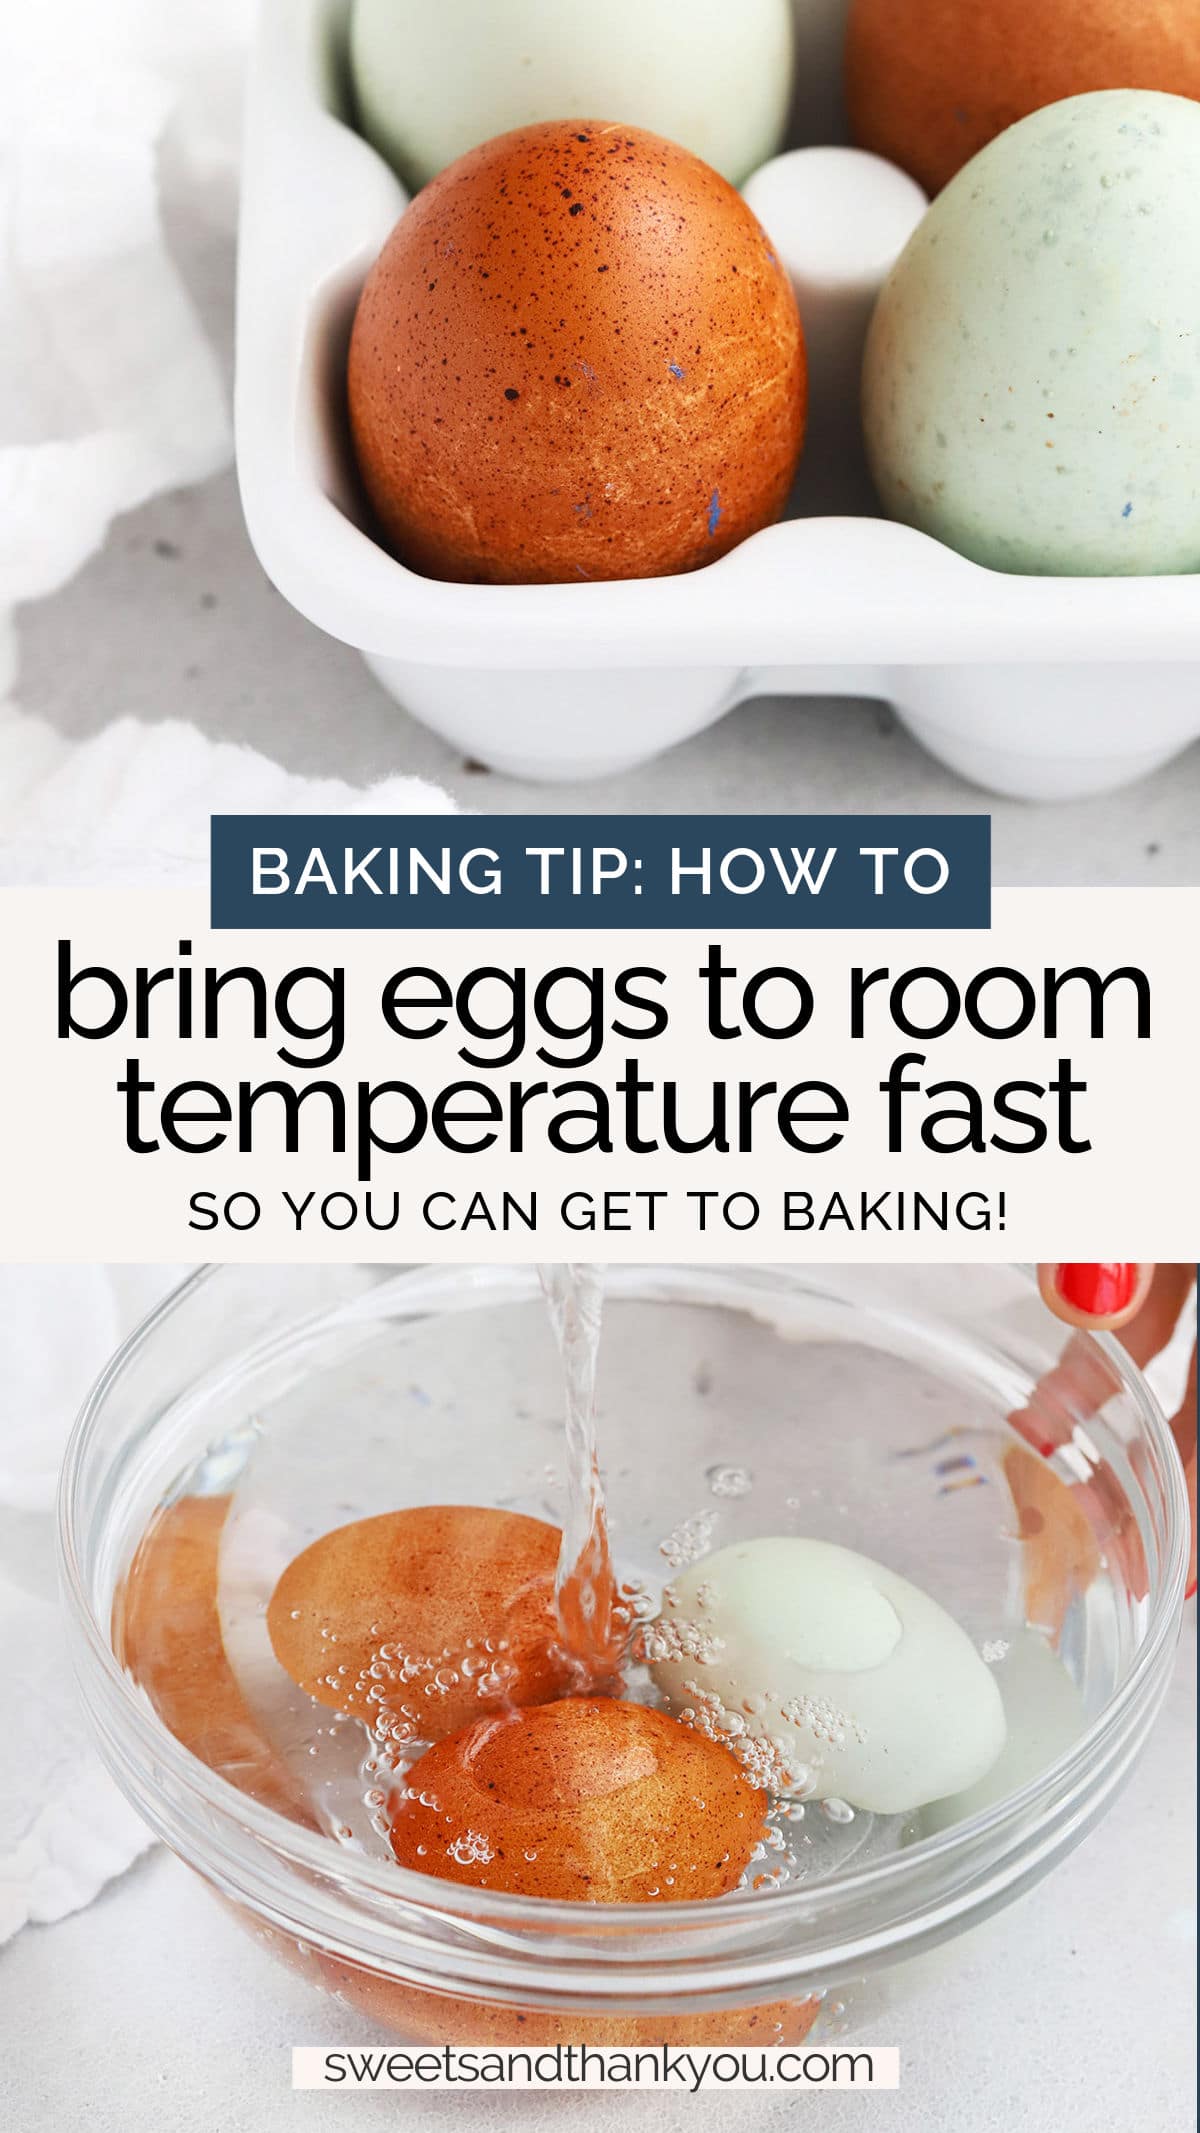 How To Get Eggs To Room Temperature Quickly - Learn the best trick for getting eggs to room temperature quickly & why room temperature eggs are important! / how long does it take eggs to get to room temperature / water trick for bringing eggs to room temperature / how to bring separated eggs to room temperature / when you need to use room temperature eggs / what temperature are room temperature eggs / when can you use cold eggs / how to tell eggs are room temperature